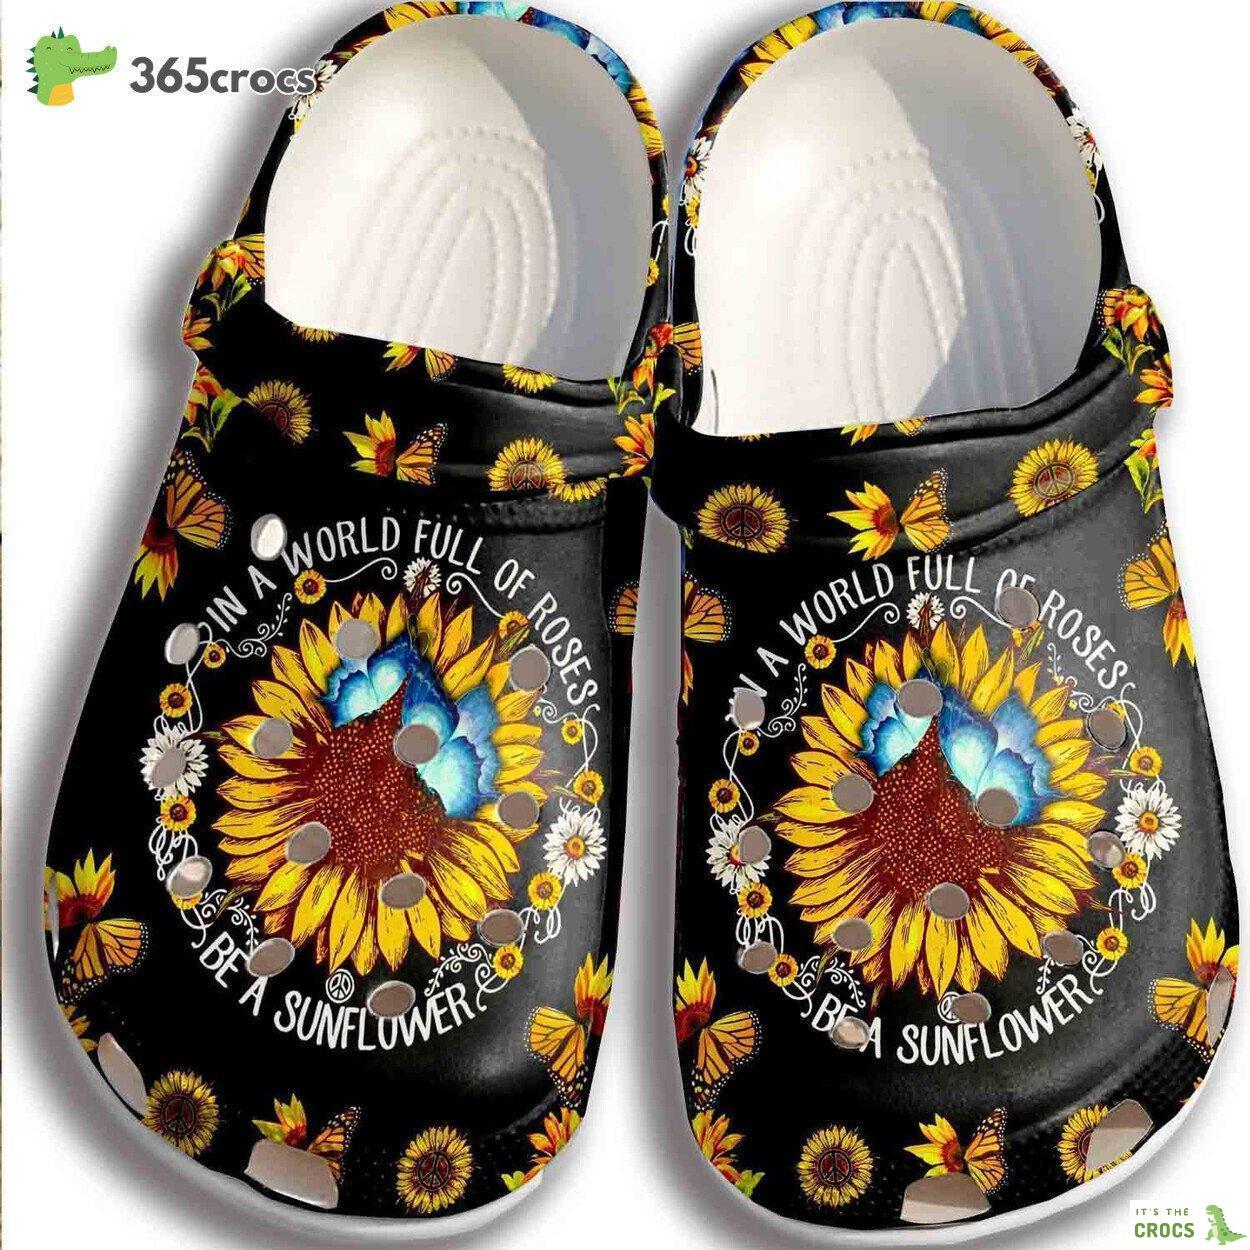 Sunflower Butterfly Hippie Croc Shoes Women Be A Sunflower Shoes Crocbland Clog Gifts For Mother Day